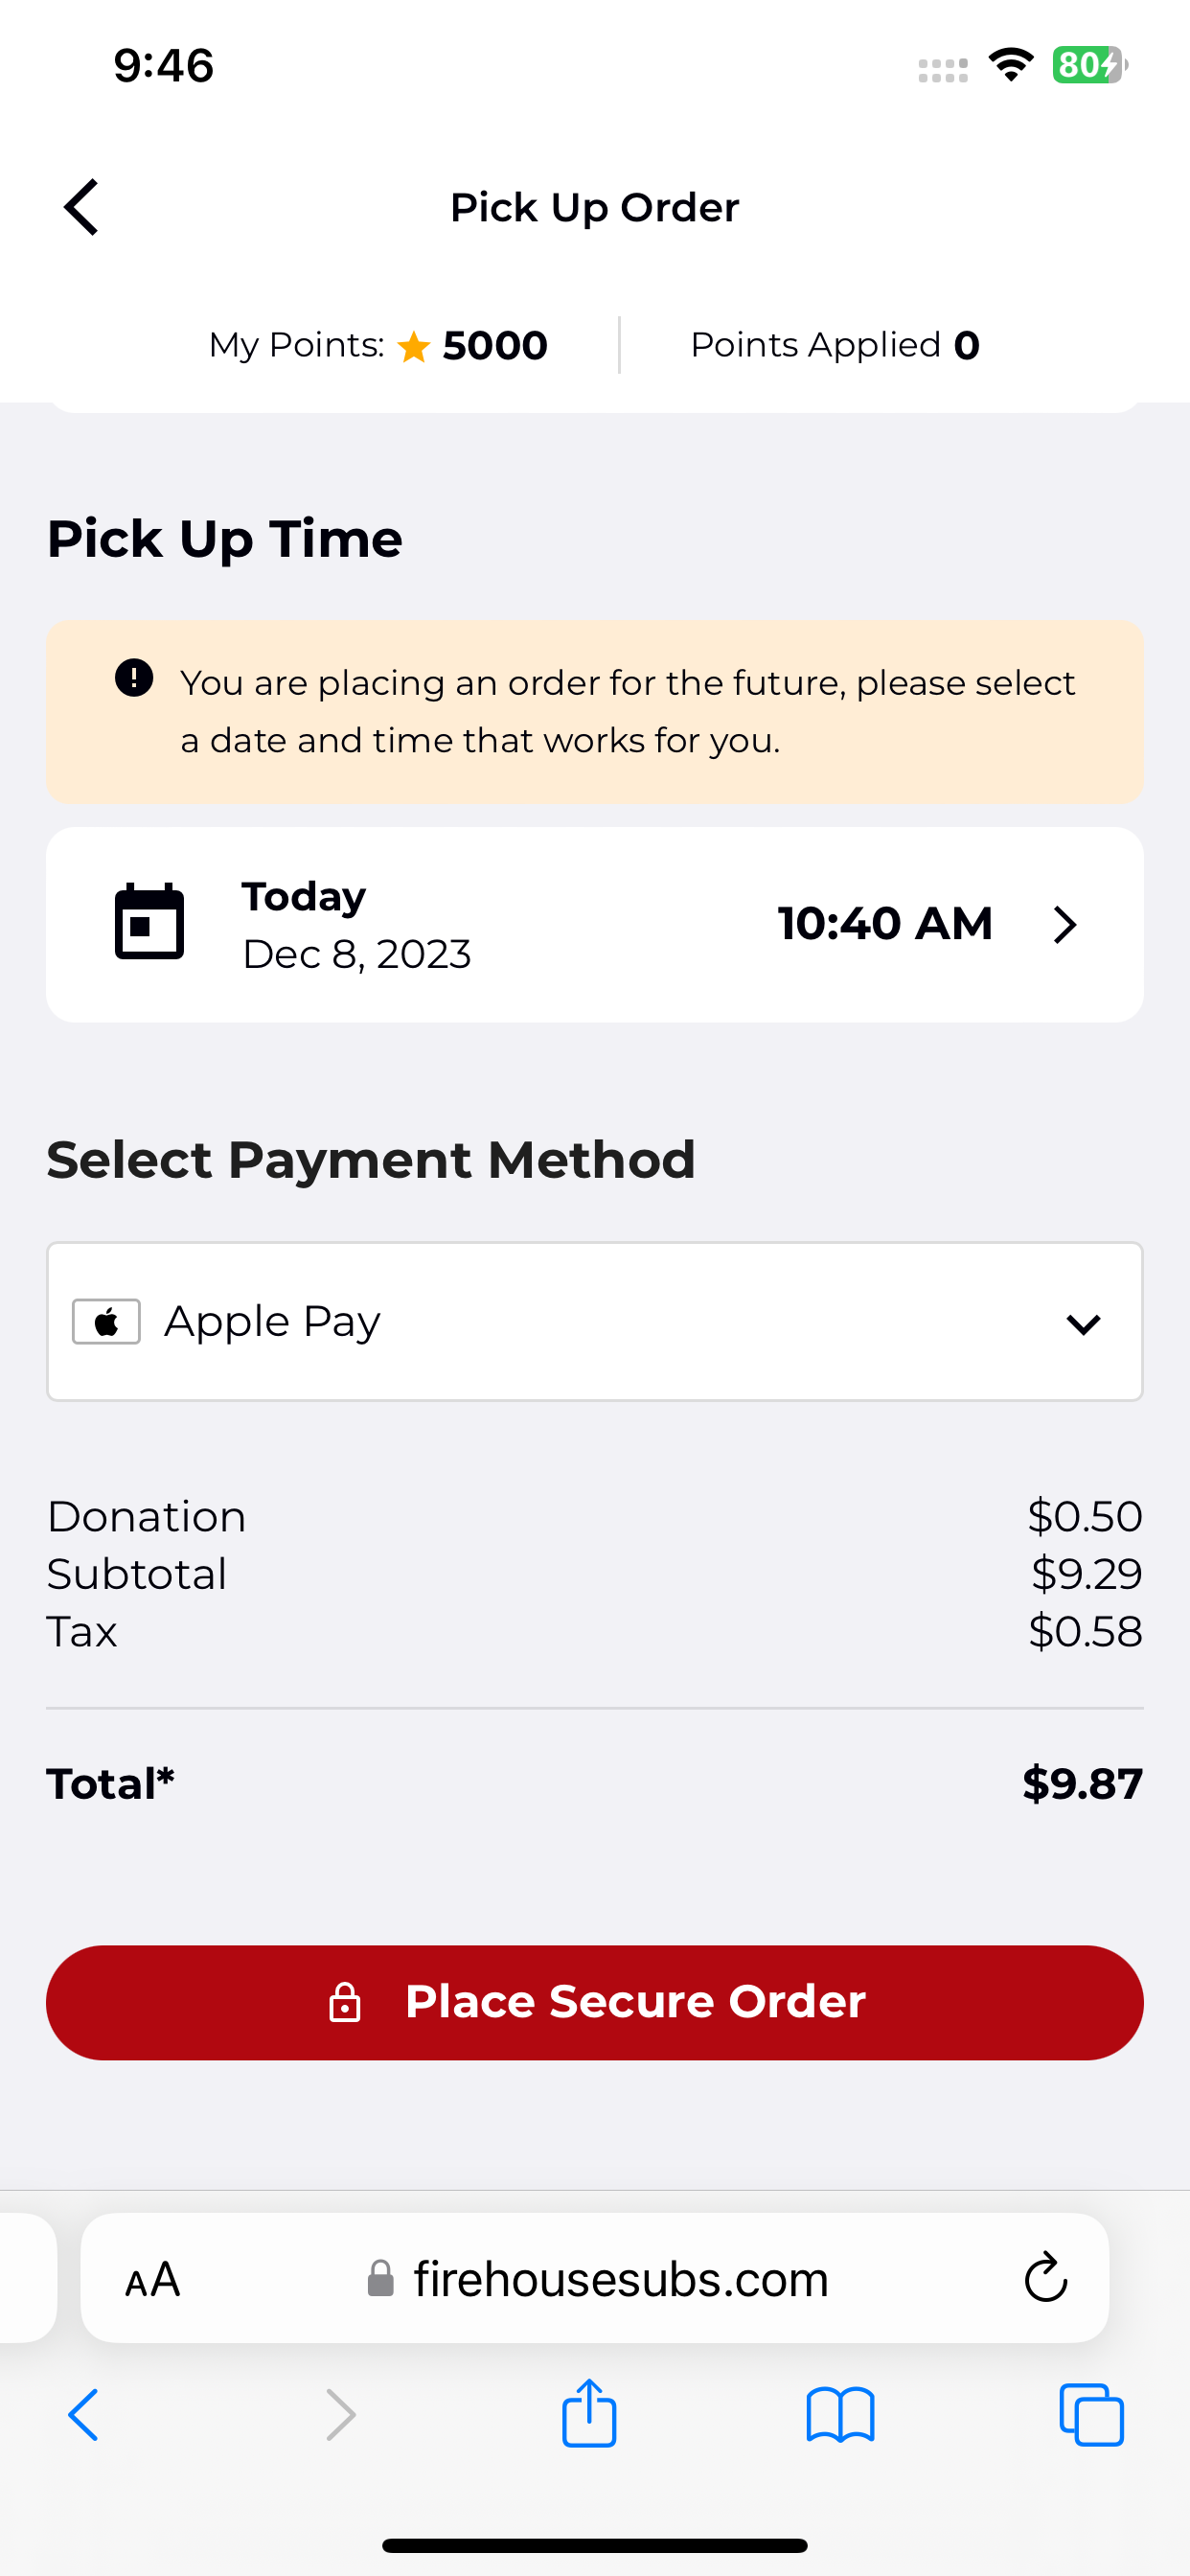 Firehouse Subs accepts Apple Pay on its website.